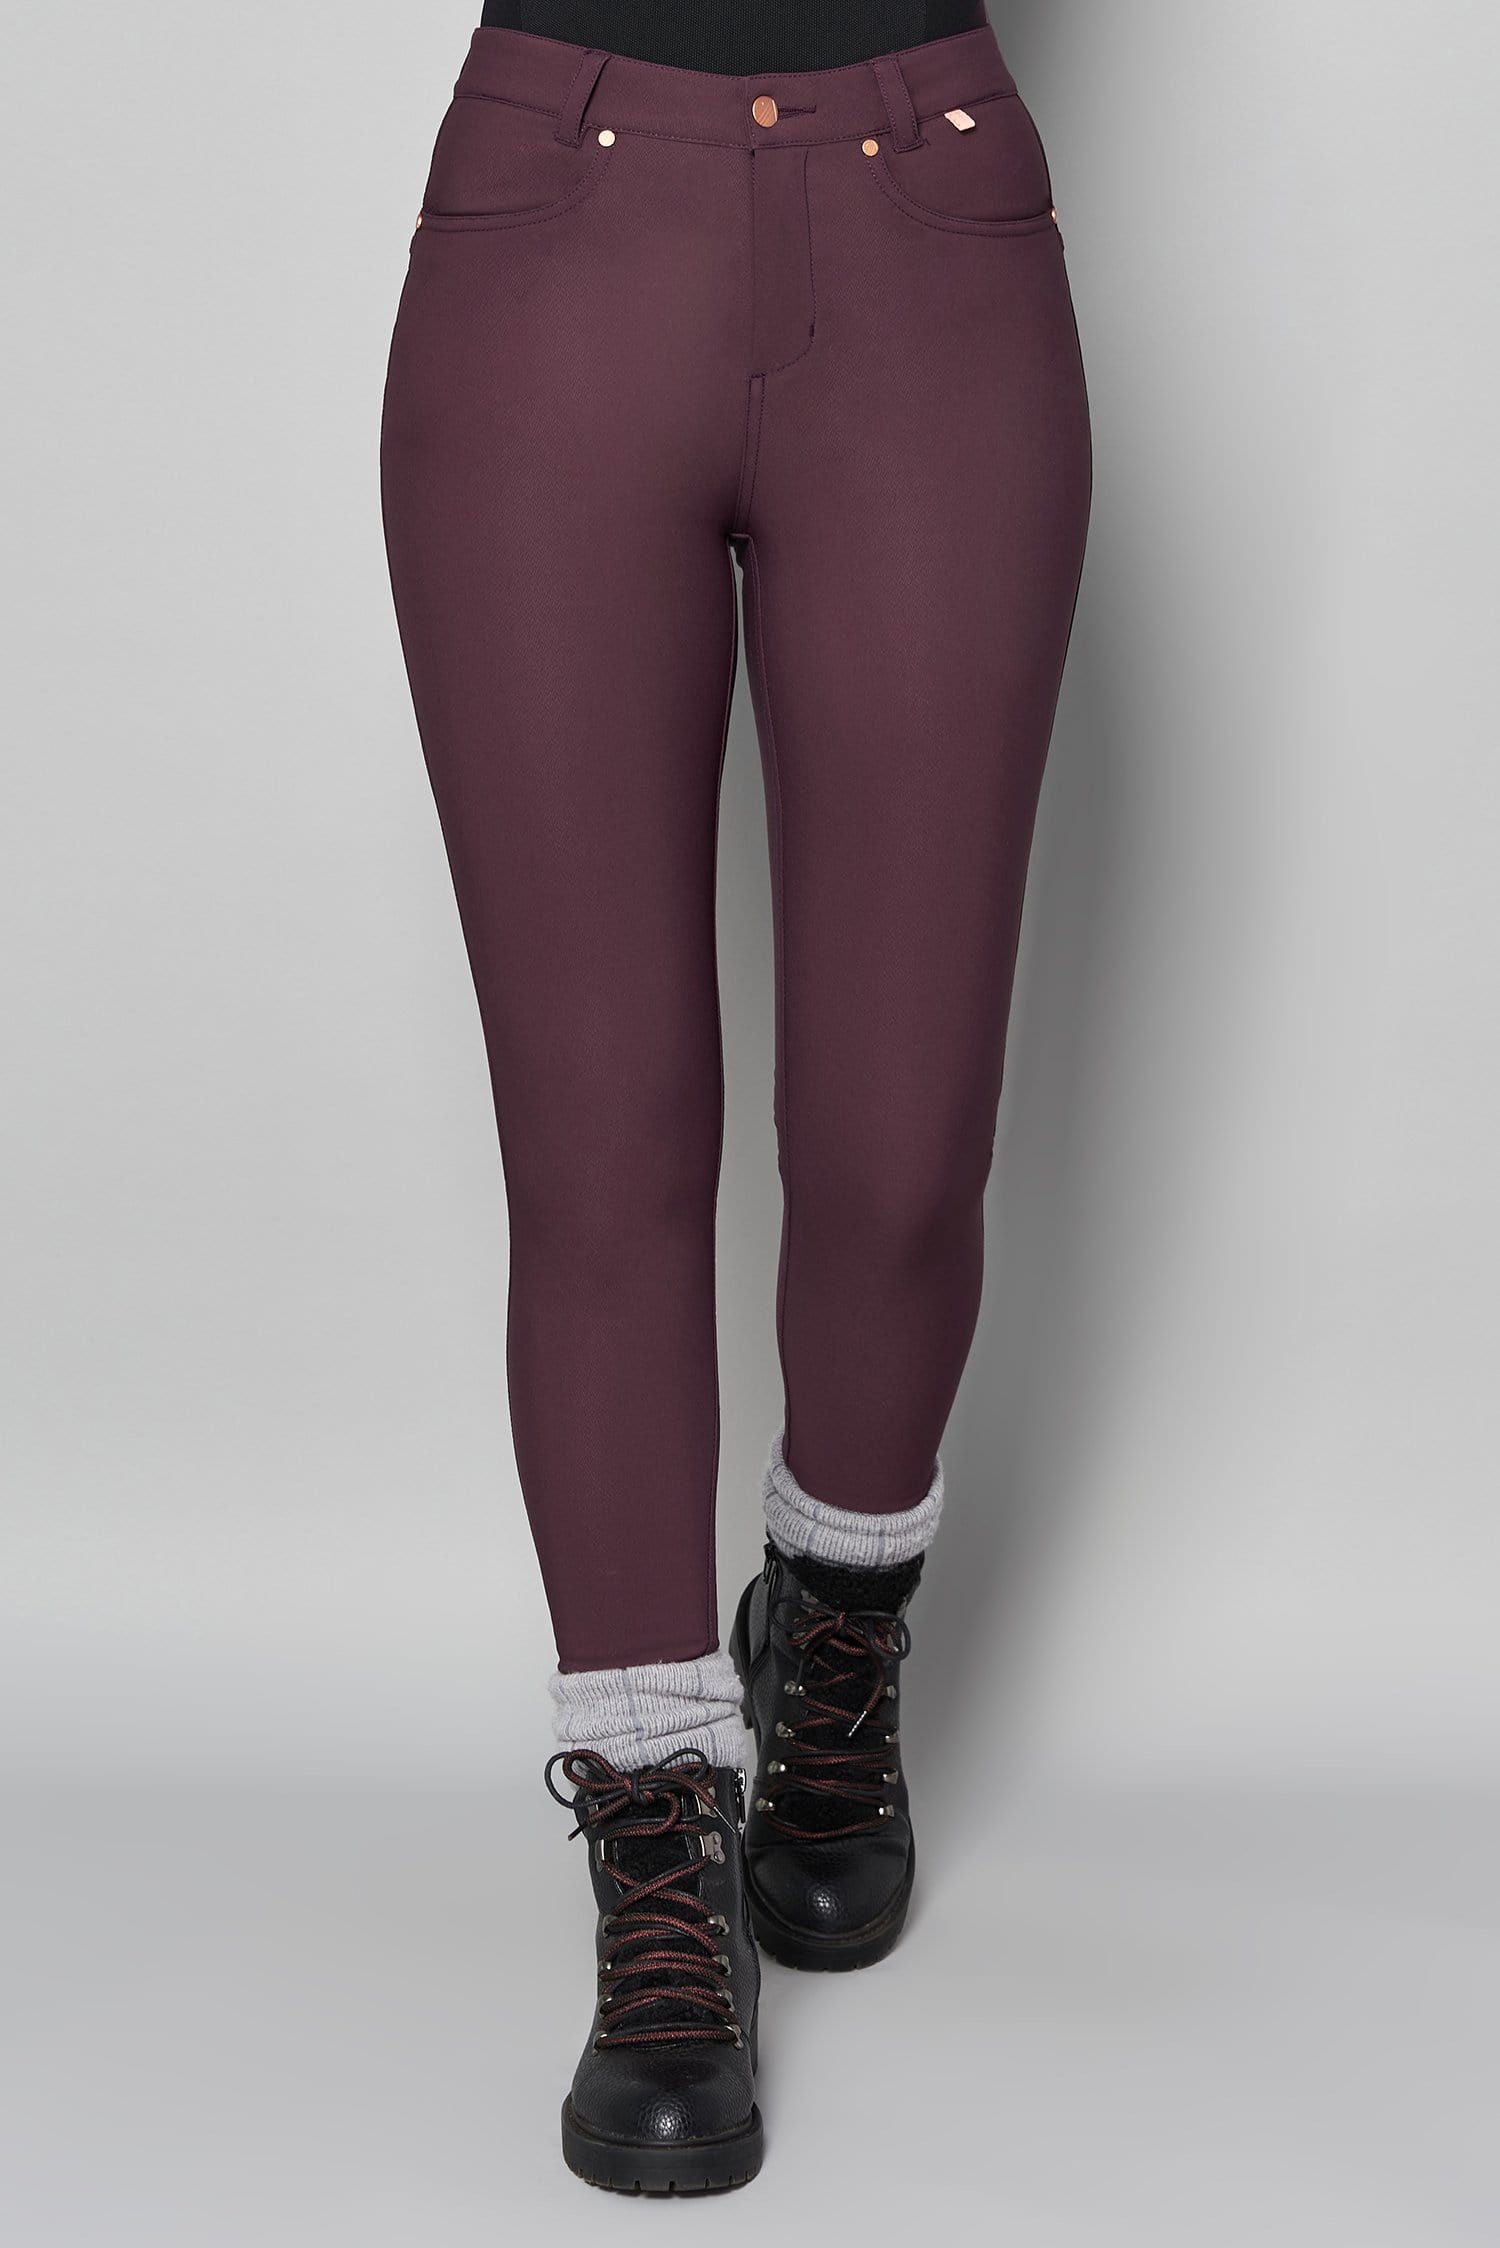 Thermal Skinny Outdoor Trousers - Aubergine - 26r / Uk8 - Womens - Acai Outdoorwear